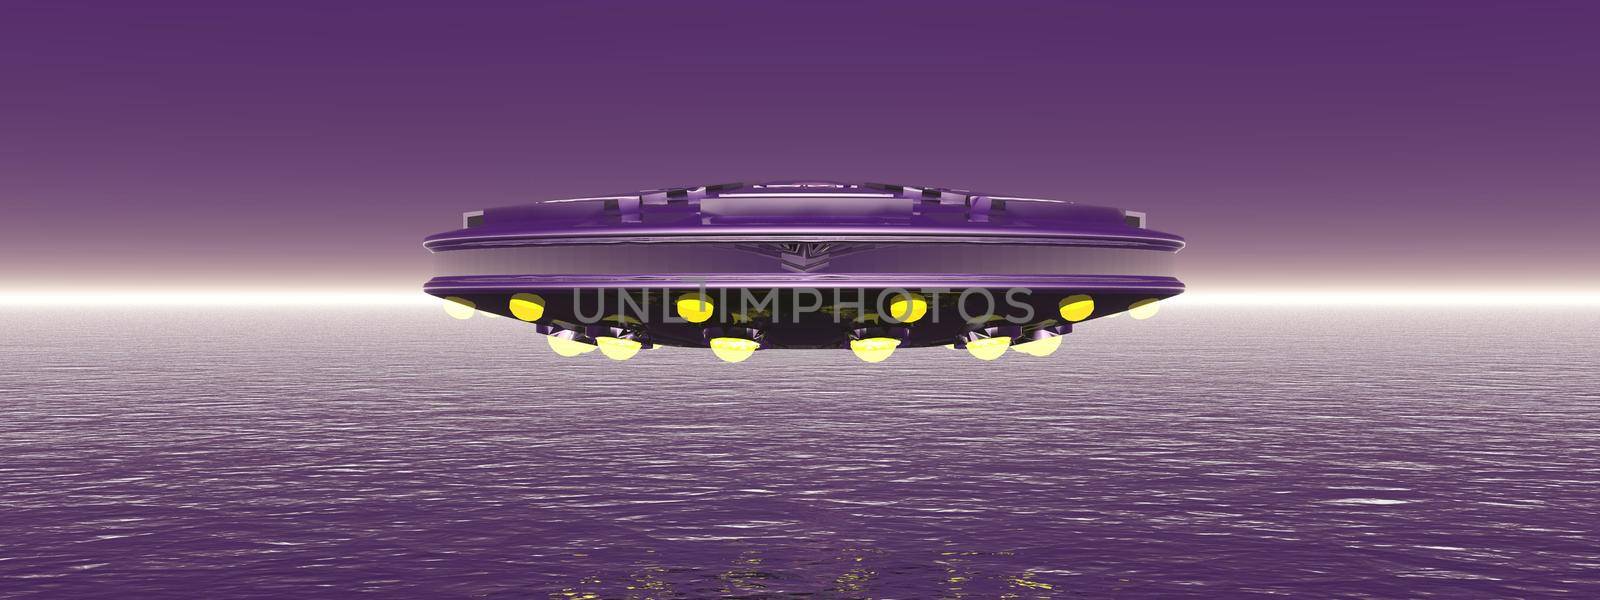 very large flying saucer in the sky - 3d rendering by mariephotos